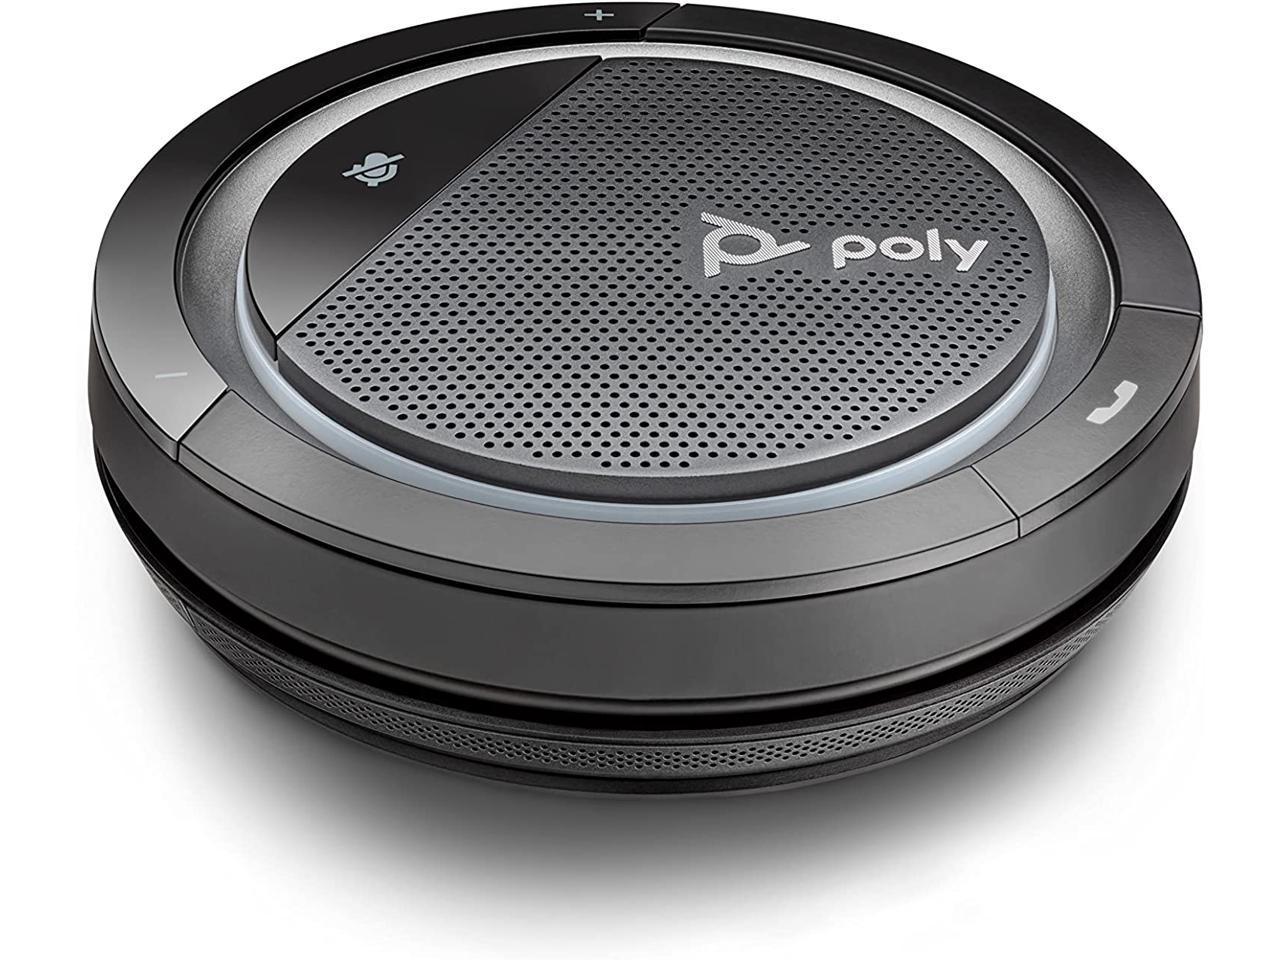 Plantronics Poly Calisto 5300 Personal Bluetooth Speakerphone for $59.95 Shipped